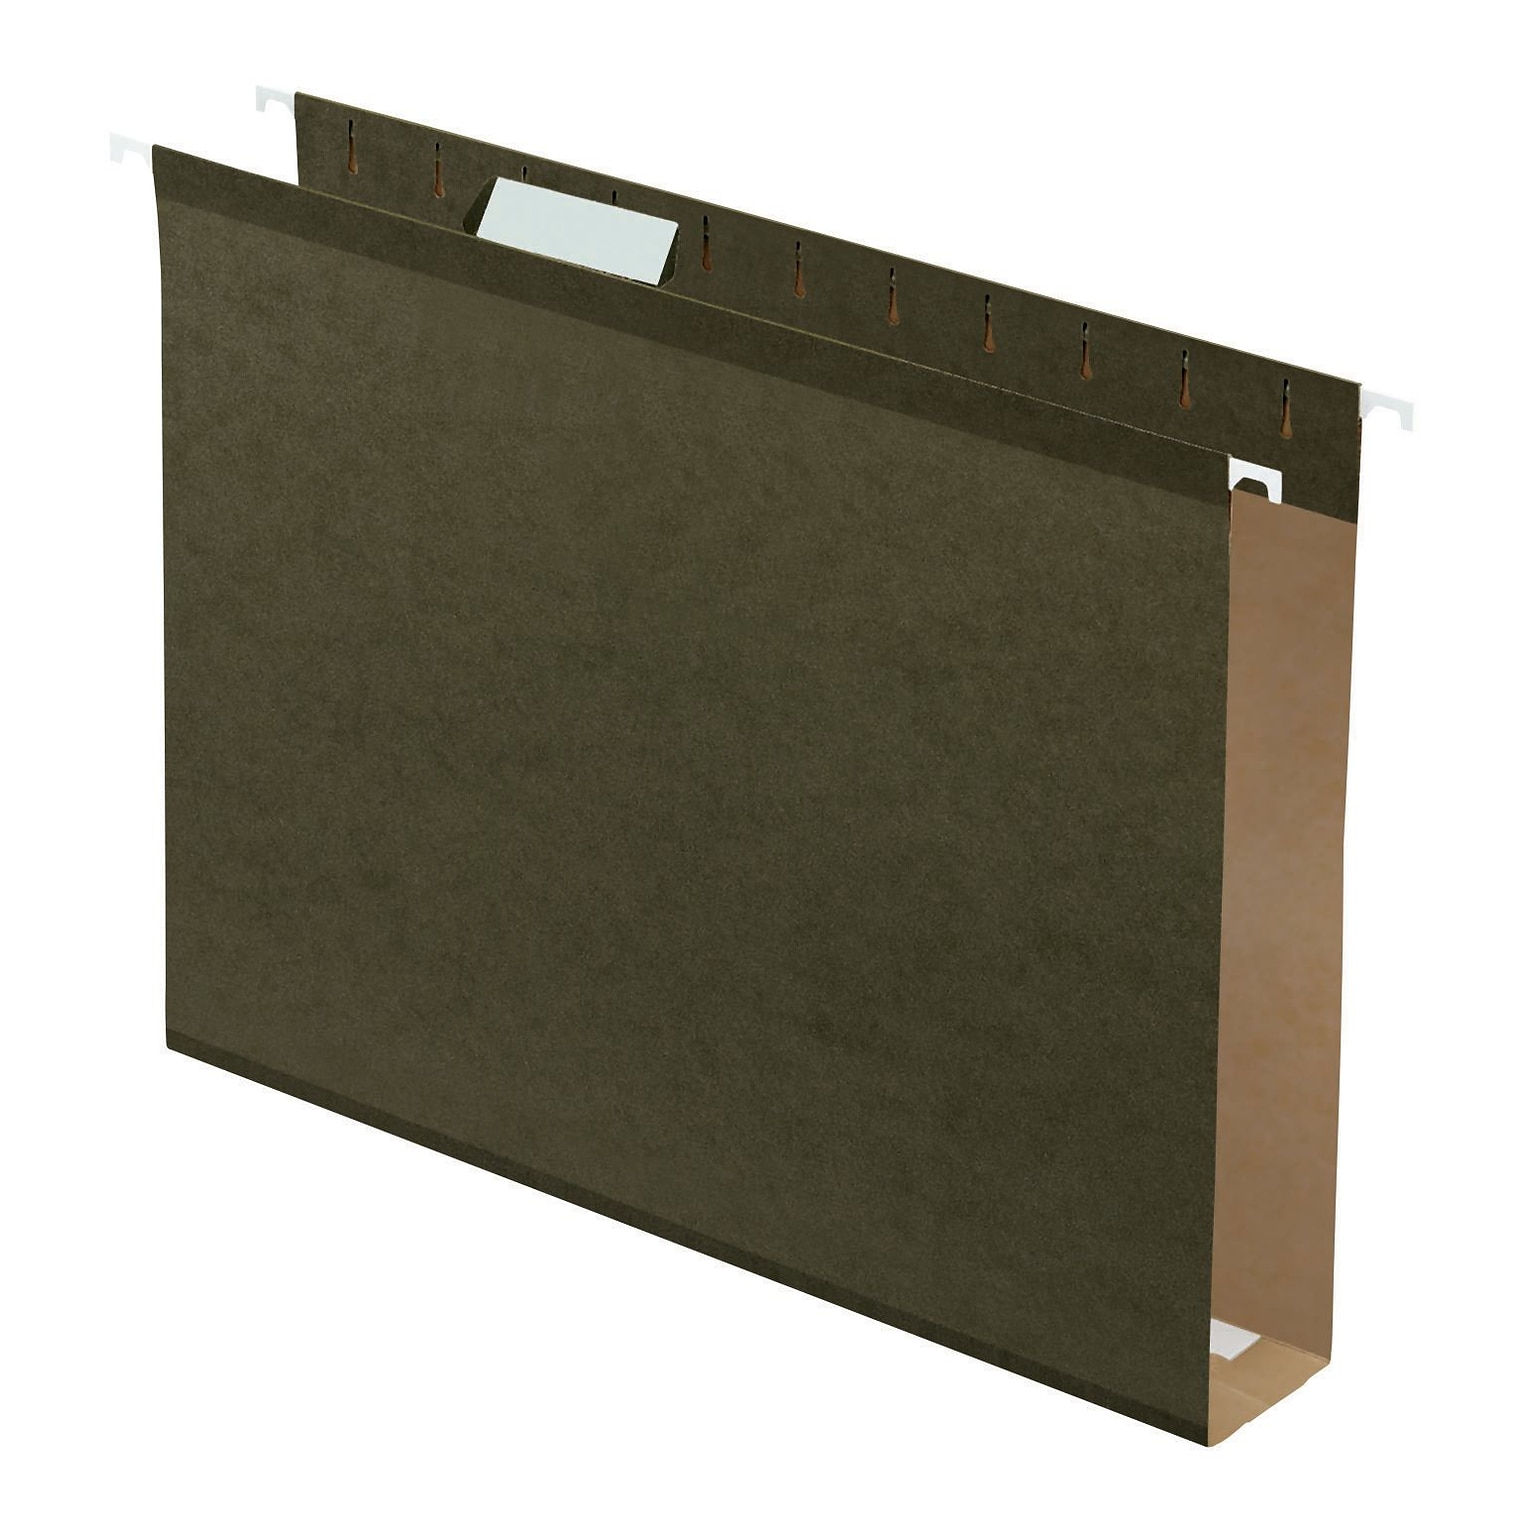 Pendaflex Box Bottom 5-Tab Hanging File Folders with 2 Expansion, Letter Size, Green, 25/Box (4152X2)